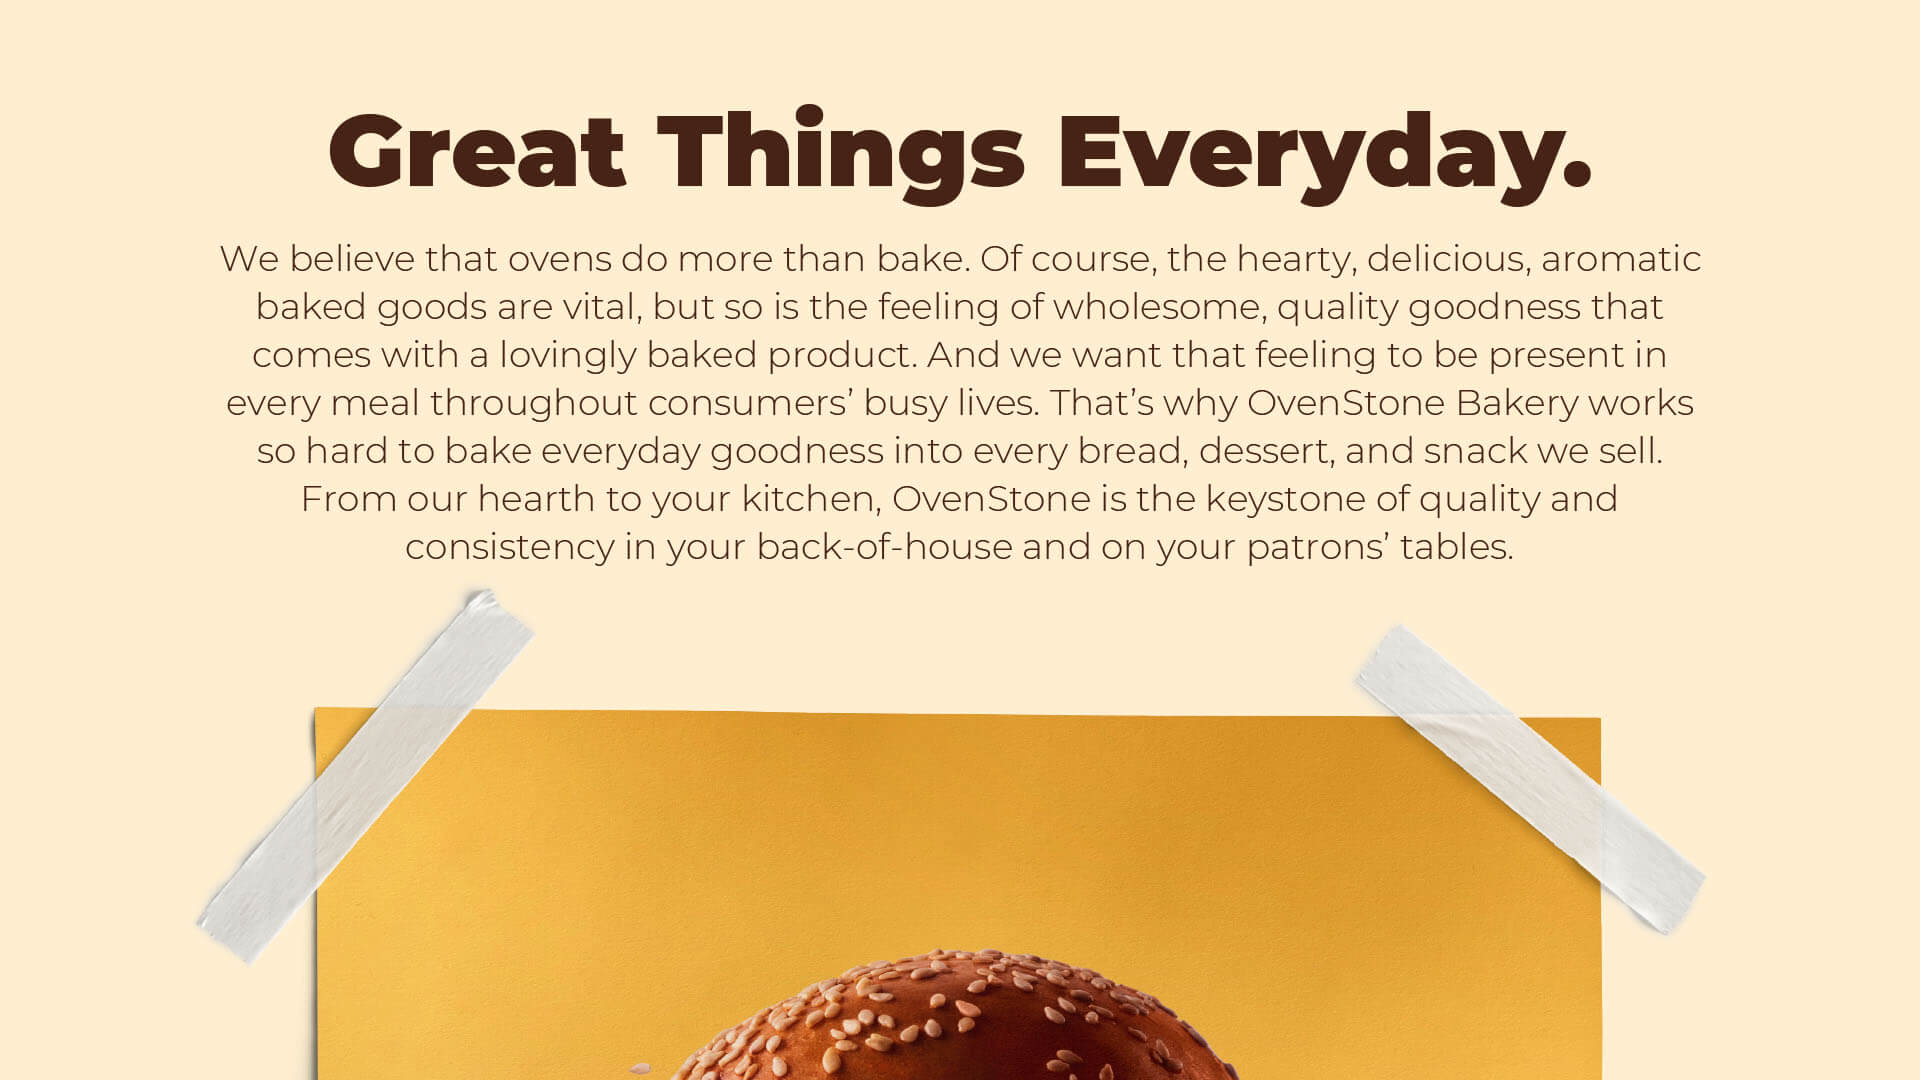 Great Things Everyday – We believe that ovens do more than bake. Of course, the hearty, delicious, aromatic baked goods are vital, but so is the feeling of wholesome, quality goodness that comes with a lovingly baked product. And we want that feeling to be present in every meal throughout consumers’ busy lives. That’s why OvenStone Bakery works so hard to bake everyday goodness into every bread, dessert, and snack we sell. From our hearth to your kitchen, OvenStone is the keystone of quality and consistency in your back-of-house and on your patrons’ tables.